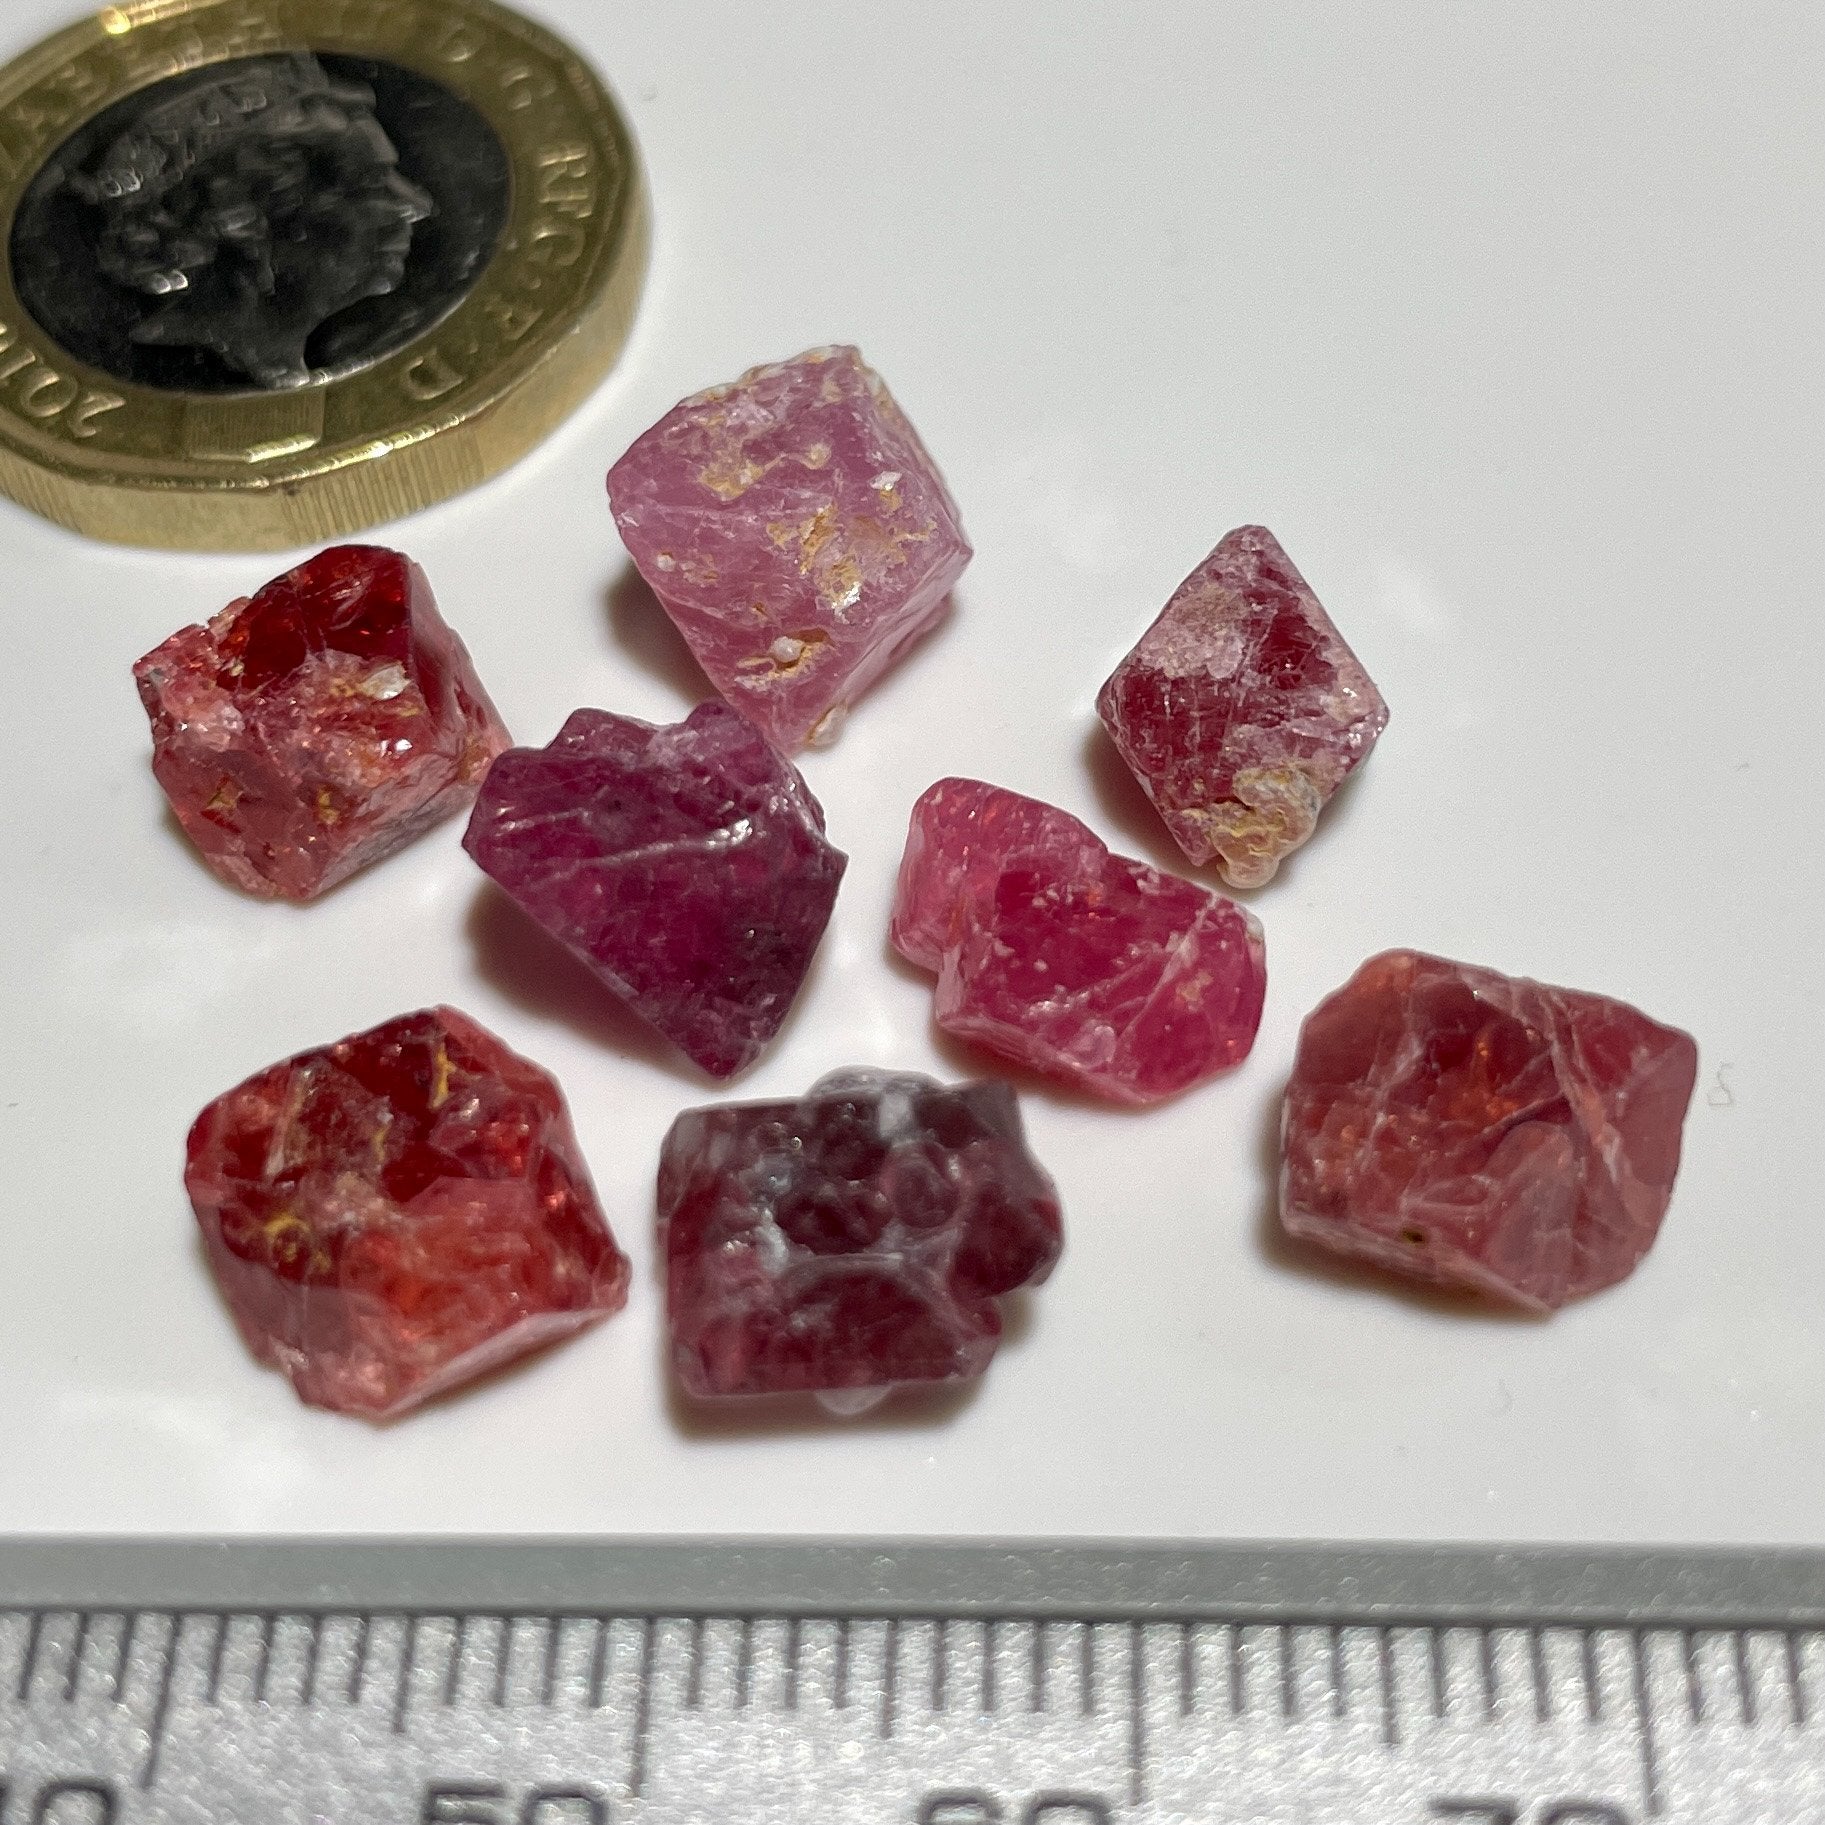 36.90Ct Mahenge Spinel Crystal Lot 3.48Ct - 6.55Ct Tanzania. Untreated Unheated. Good For Setting In